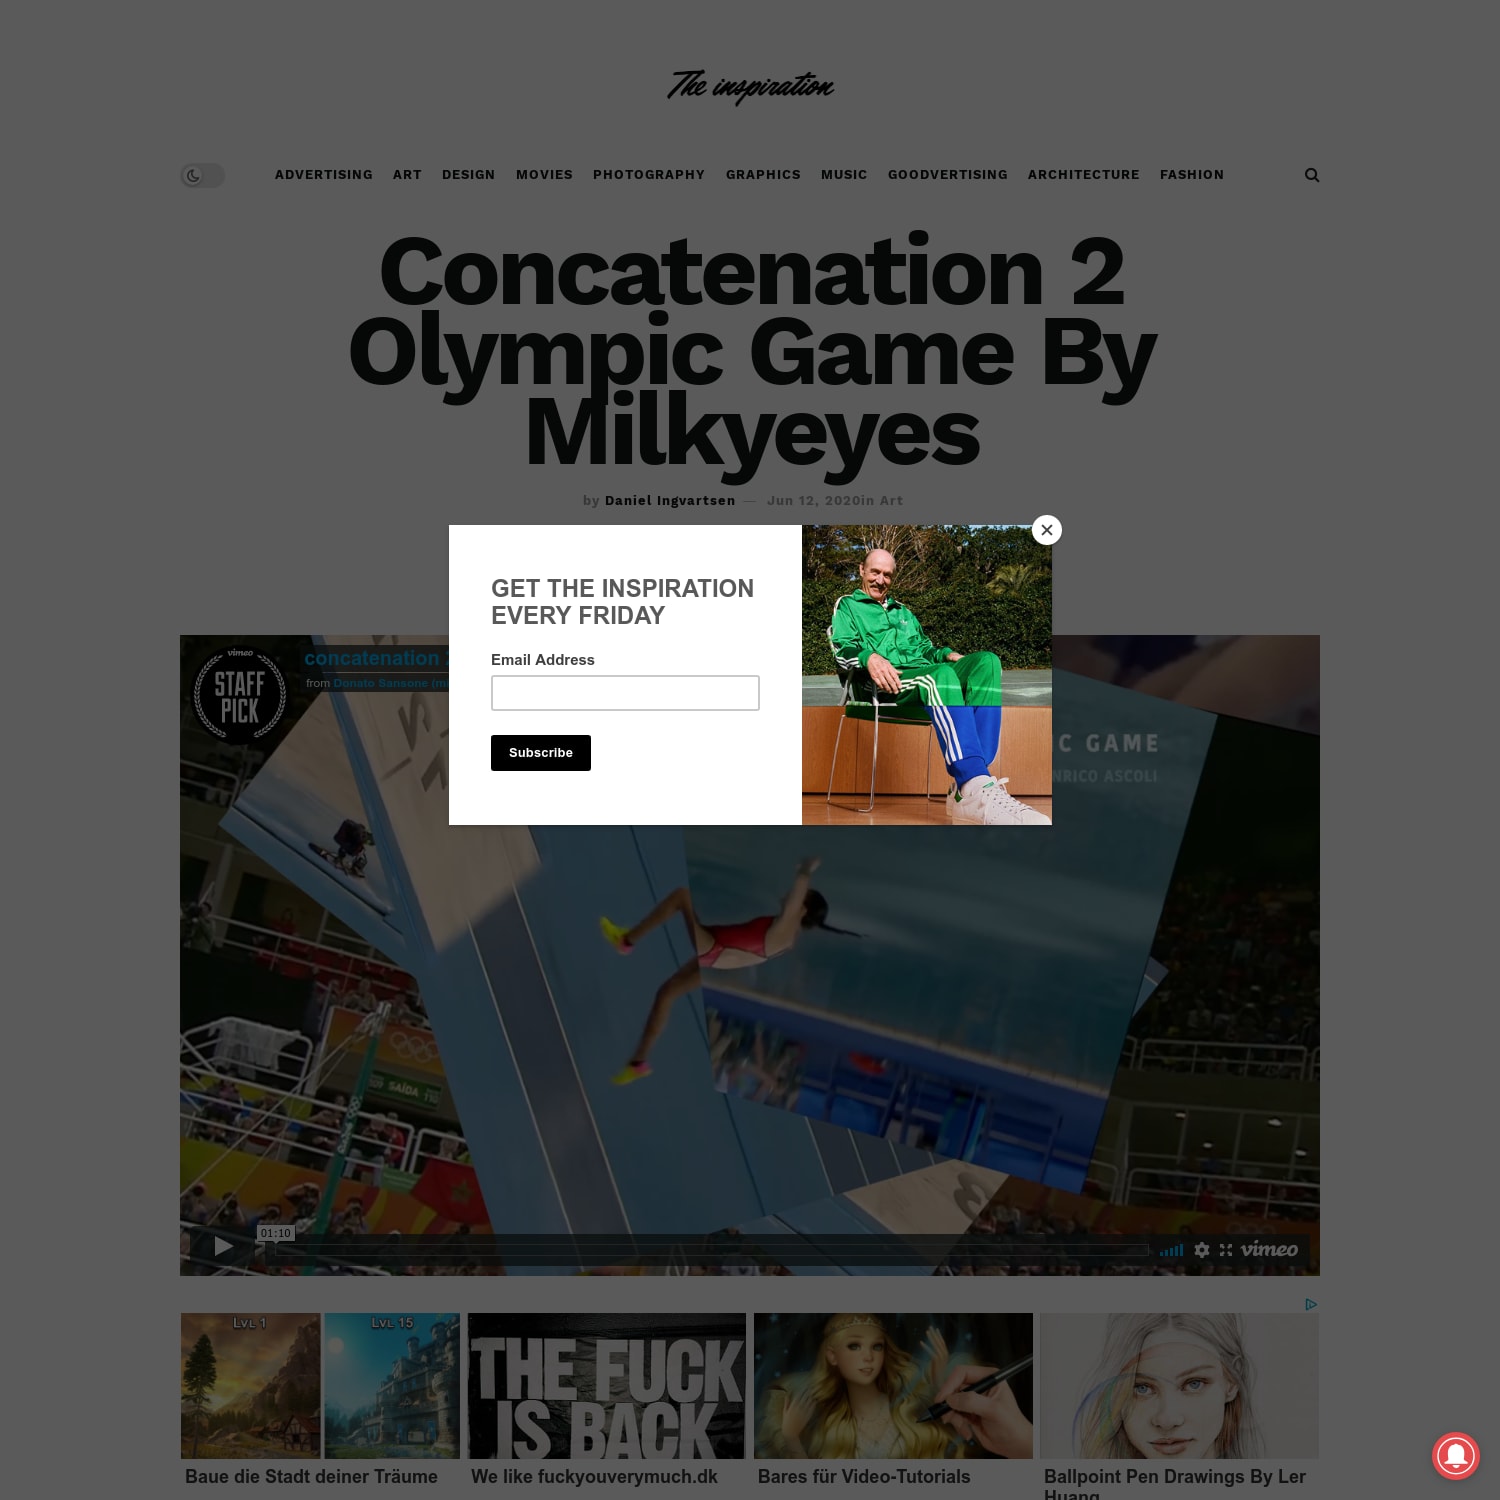 Concatenation 2 Olympic Game By Milkyeyes